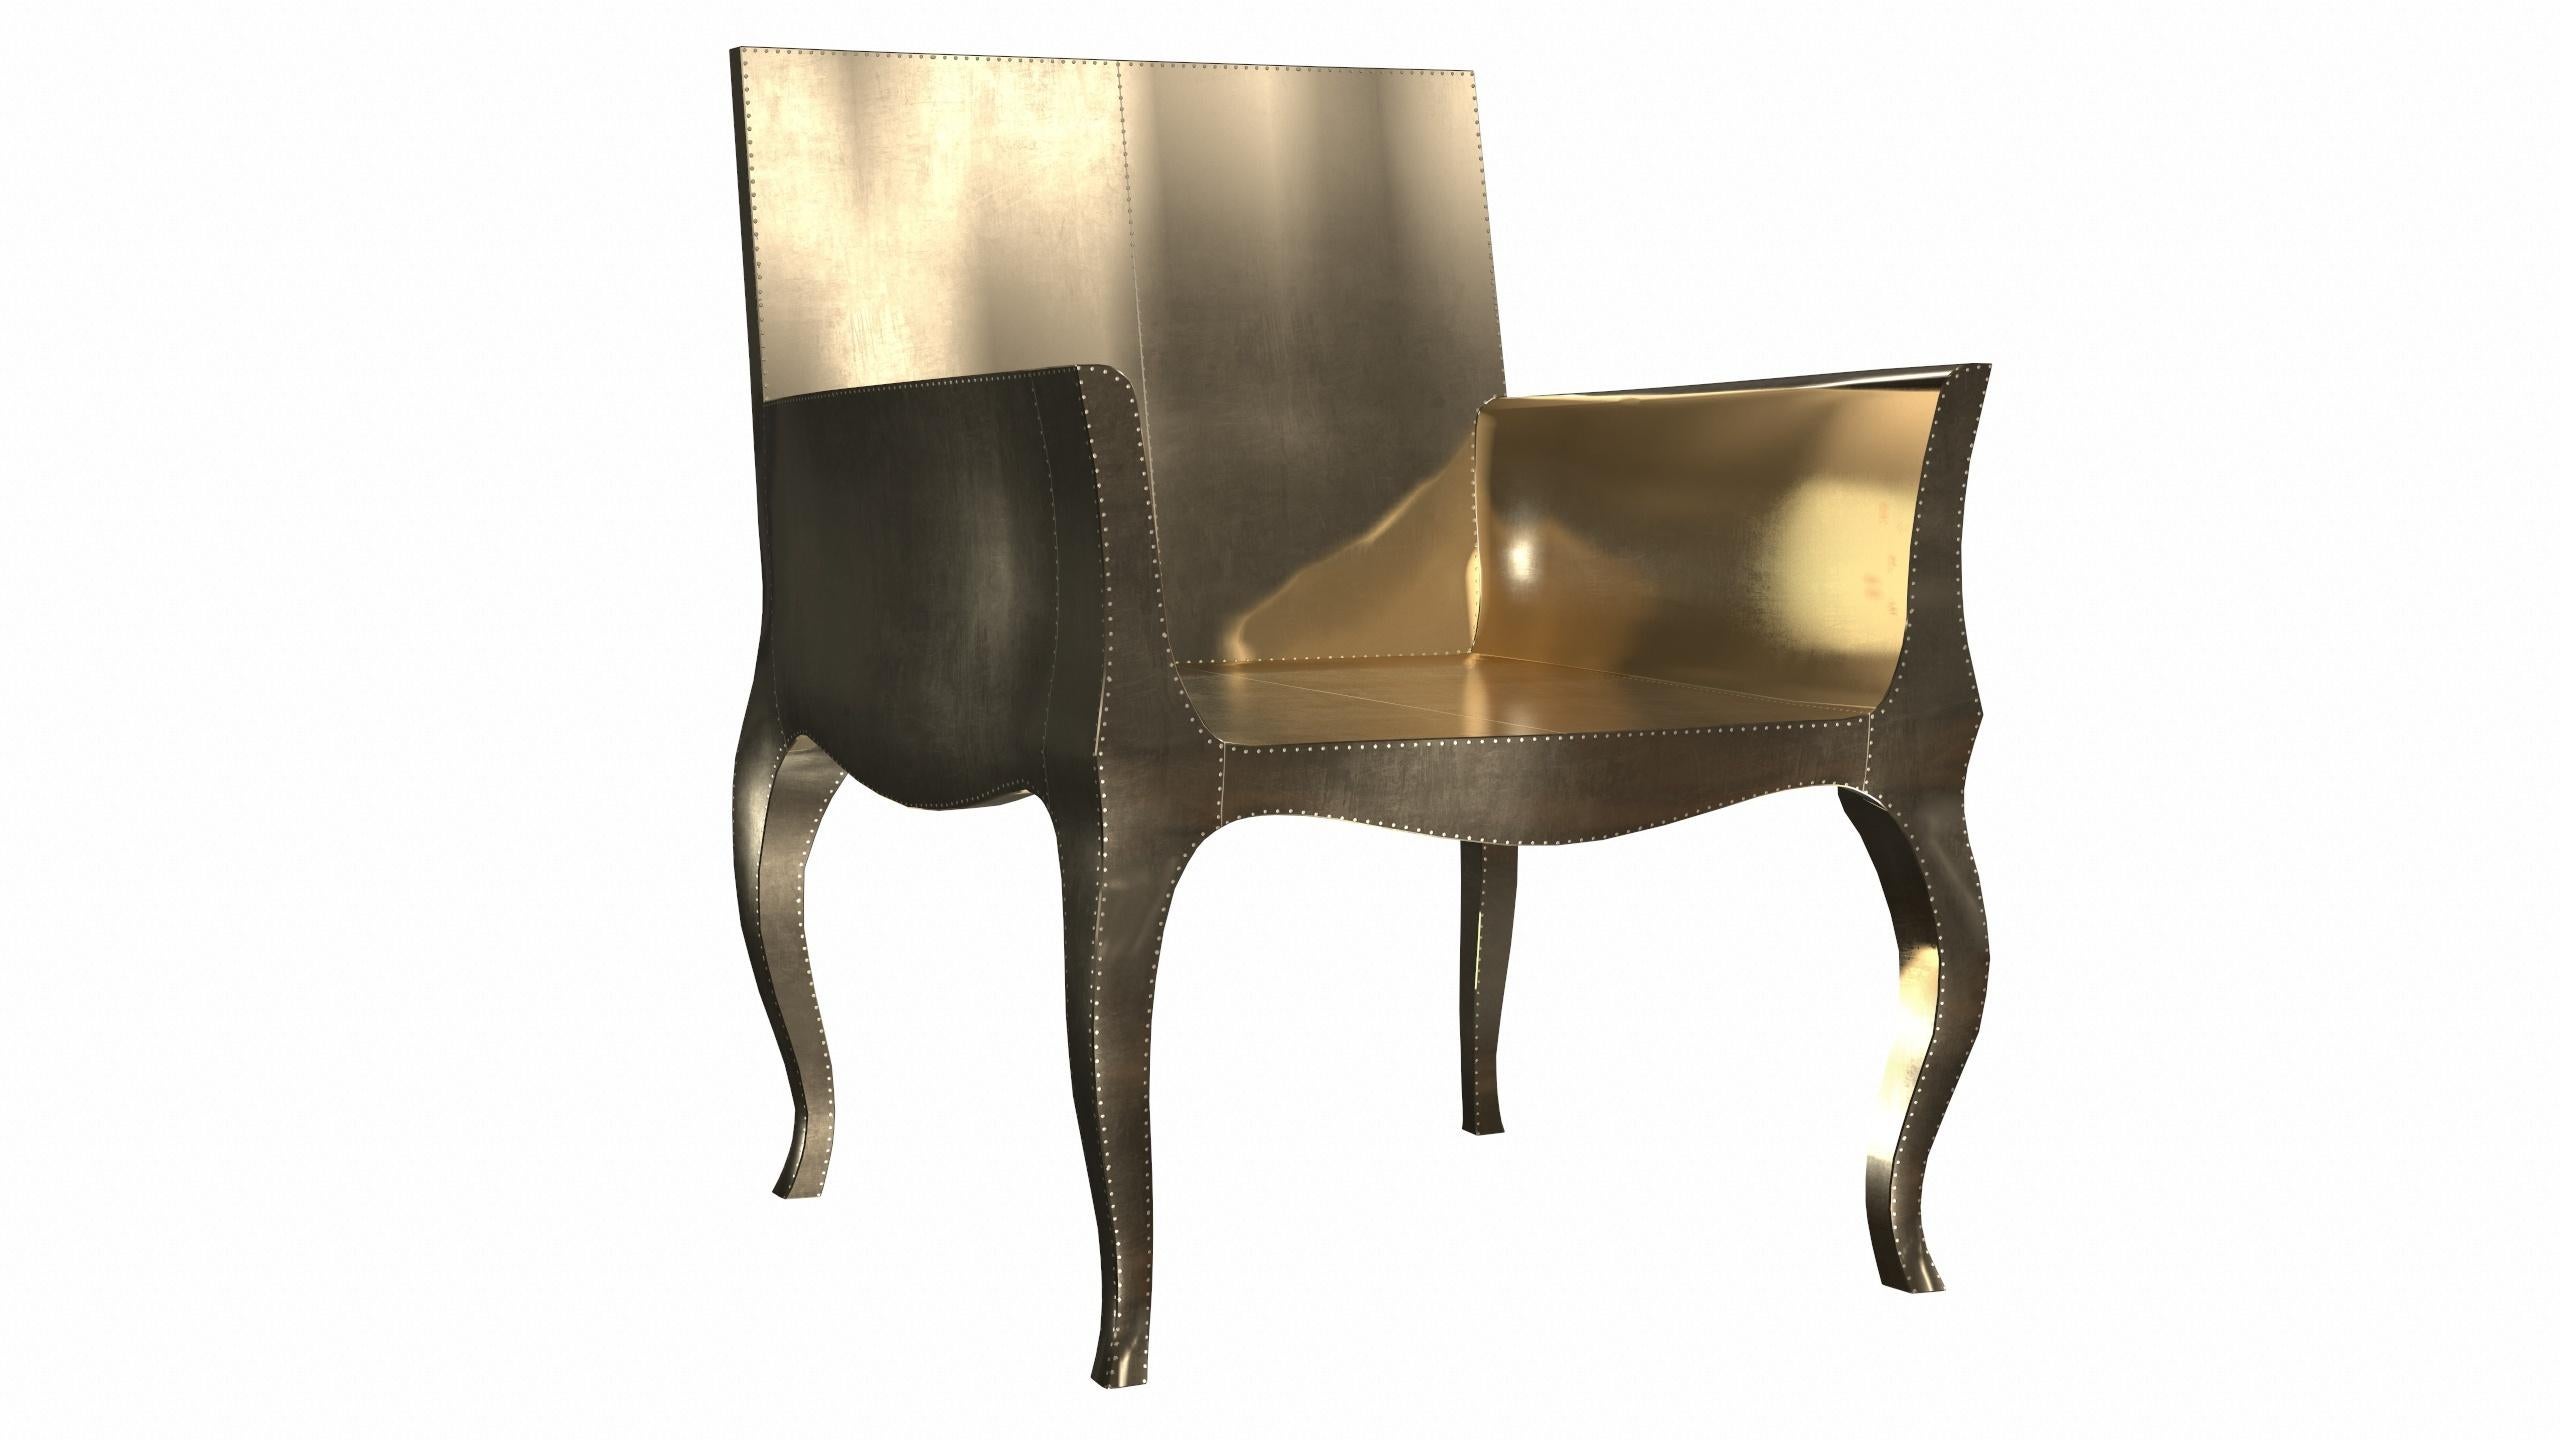 Hand-Carved Art Nouveau Chairs in Smooth Brass by Paul Mathieu for S. Odegard For Sale